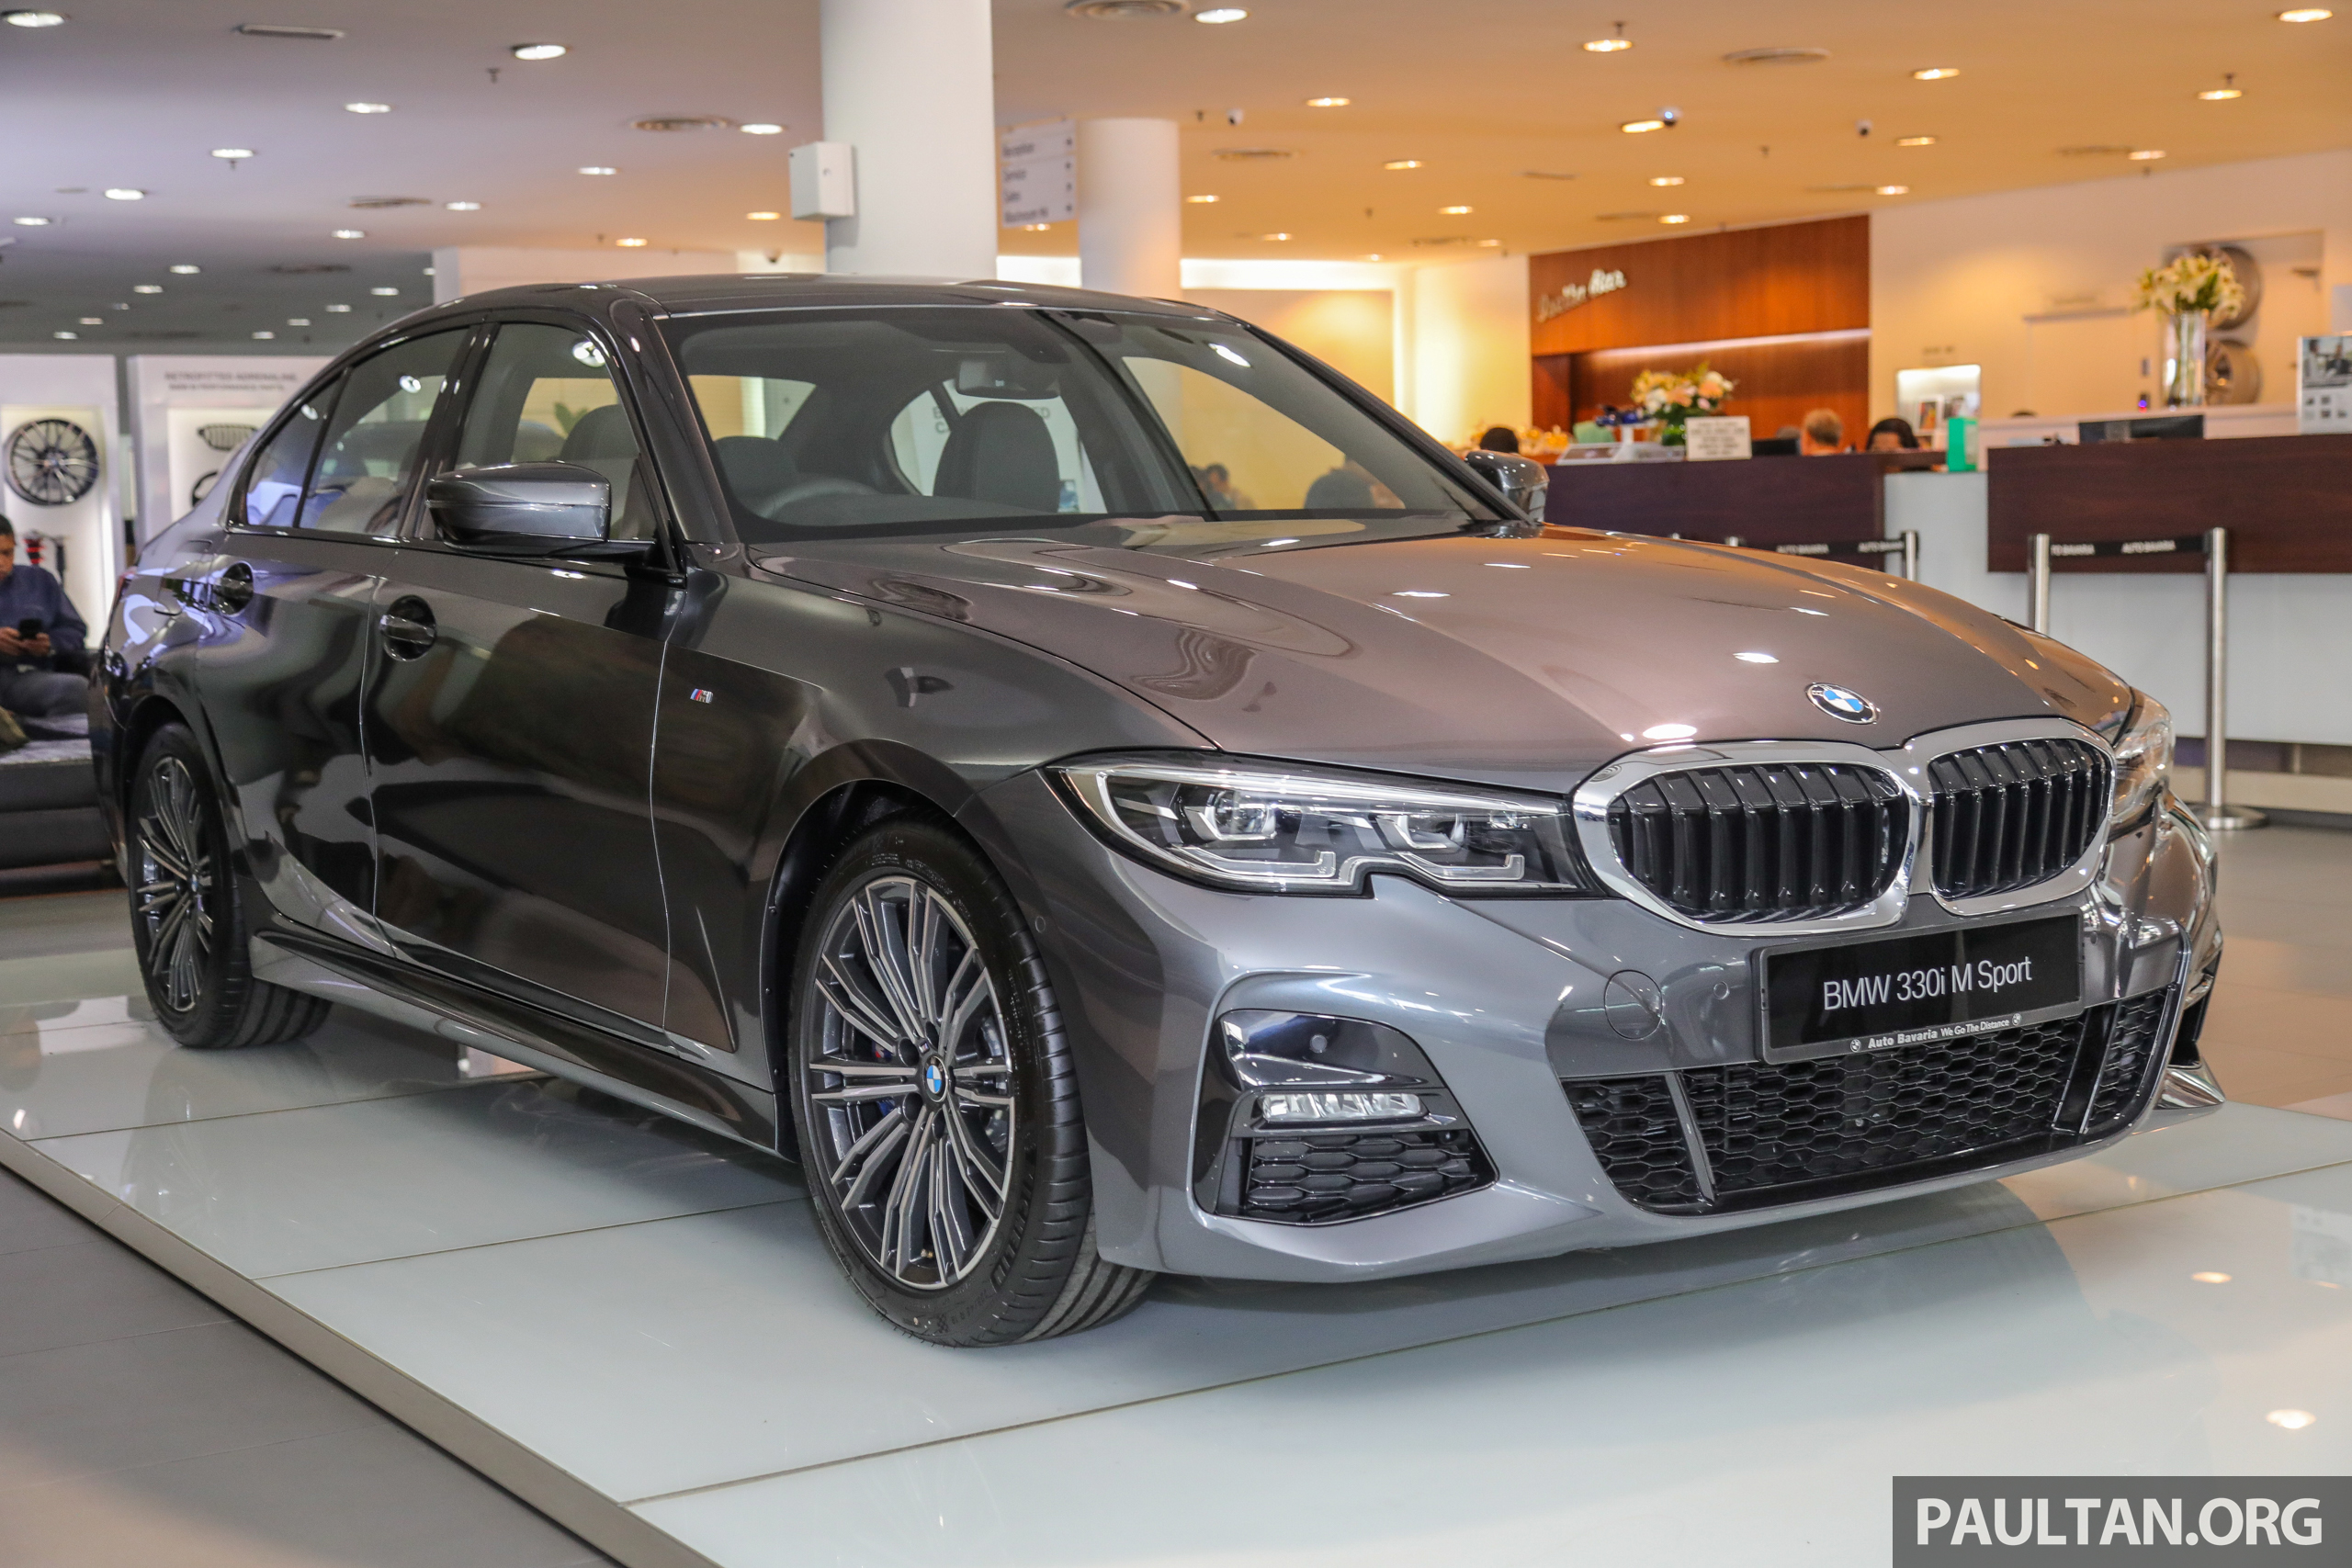 G Bmw 330i M Sport And 3i Sport Prices Increased To Rm294k And Rm249k 330i Now Comes With Aeb Paultan Org